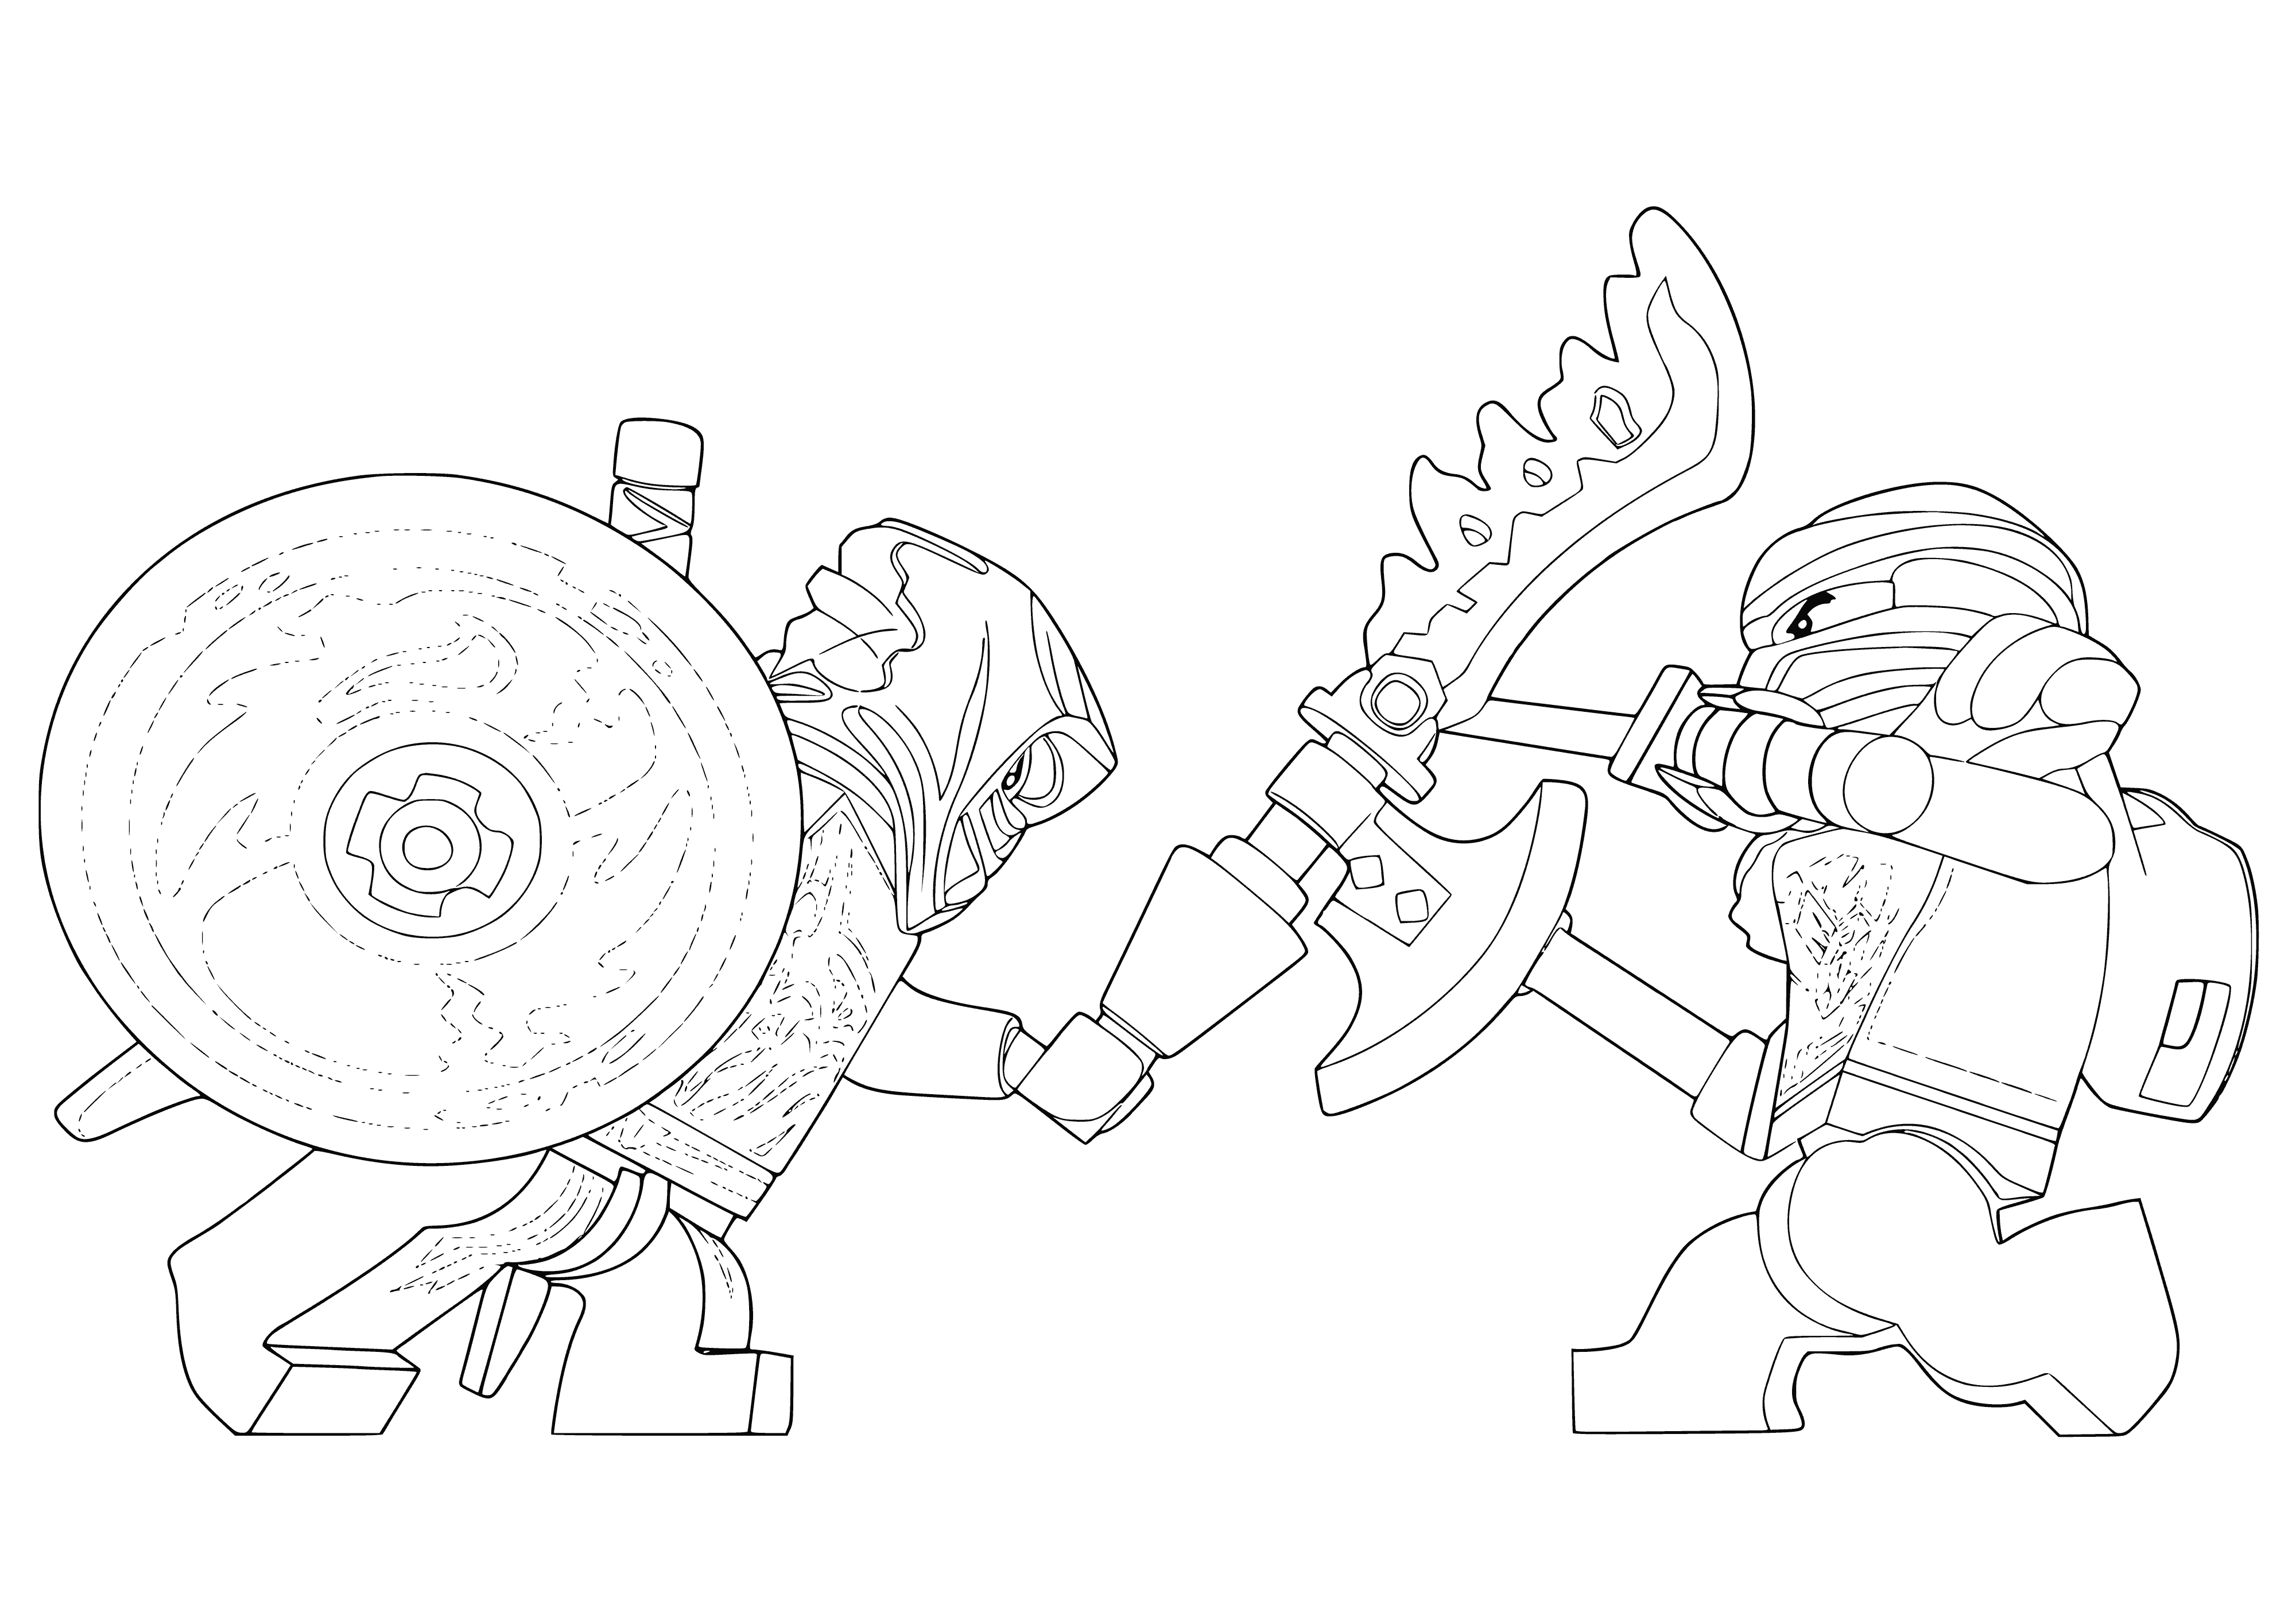 coloring page: 4 ninja figures (b/w/g) stand on platforms with weapons in front of them in a circular arena with 4 sections/symbols in the center and mountains+city in the background.